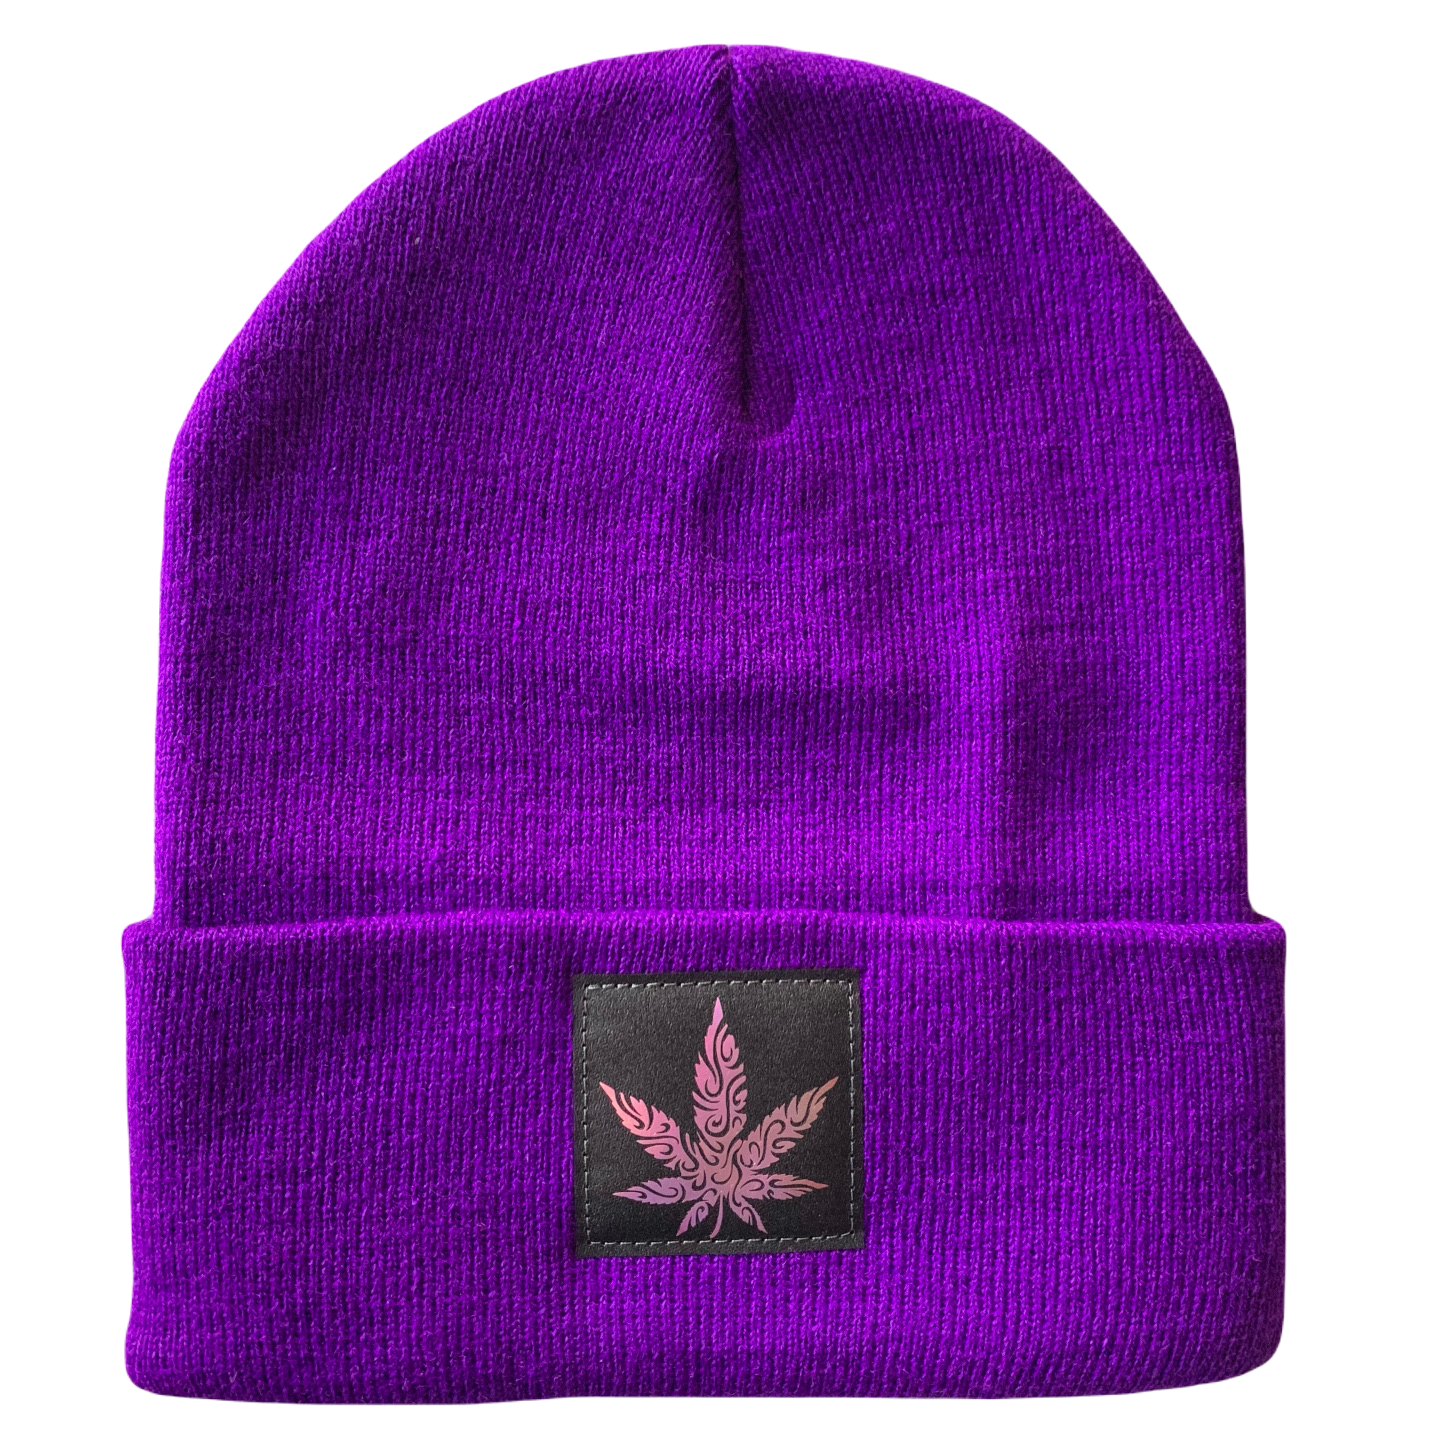 Purple Beanie with Hand Made Black and Holographic Purple, Vegan Leather Cannabis Patch by Buddha Gear 